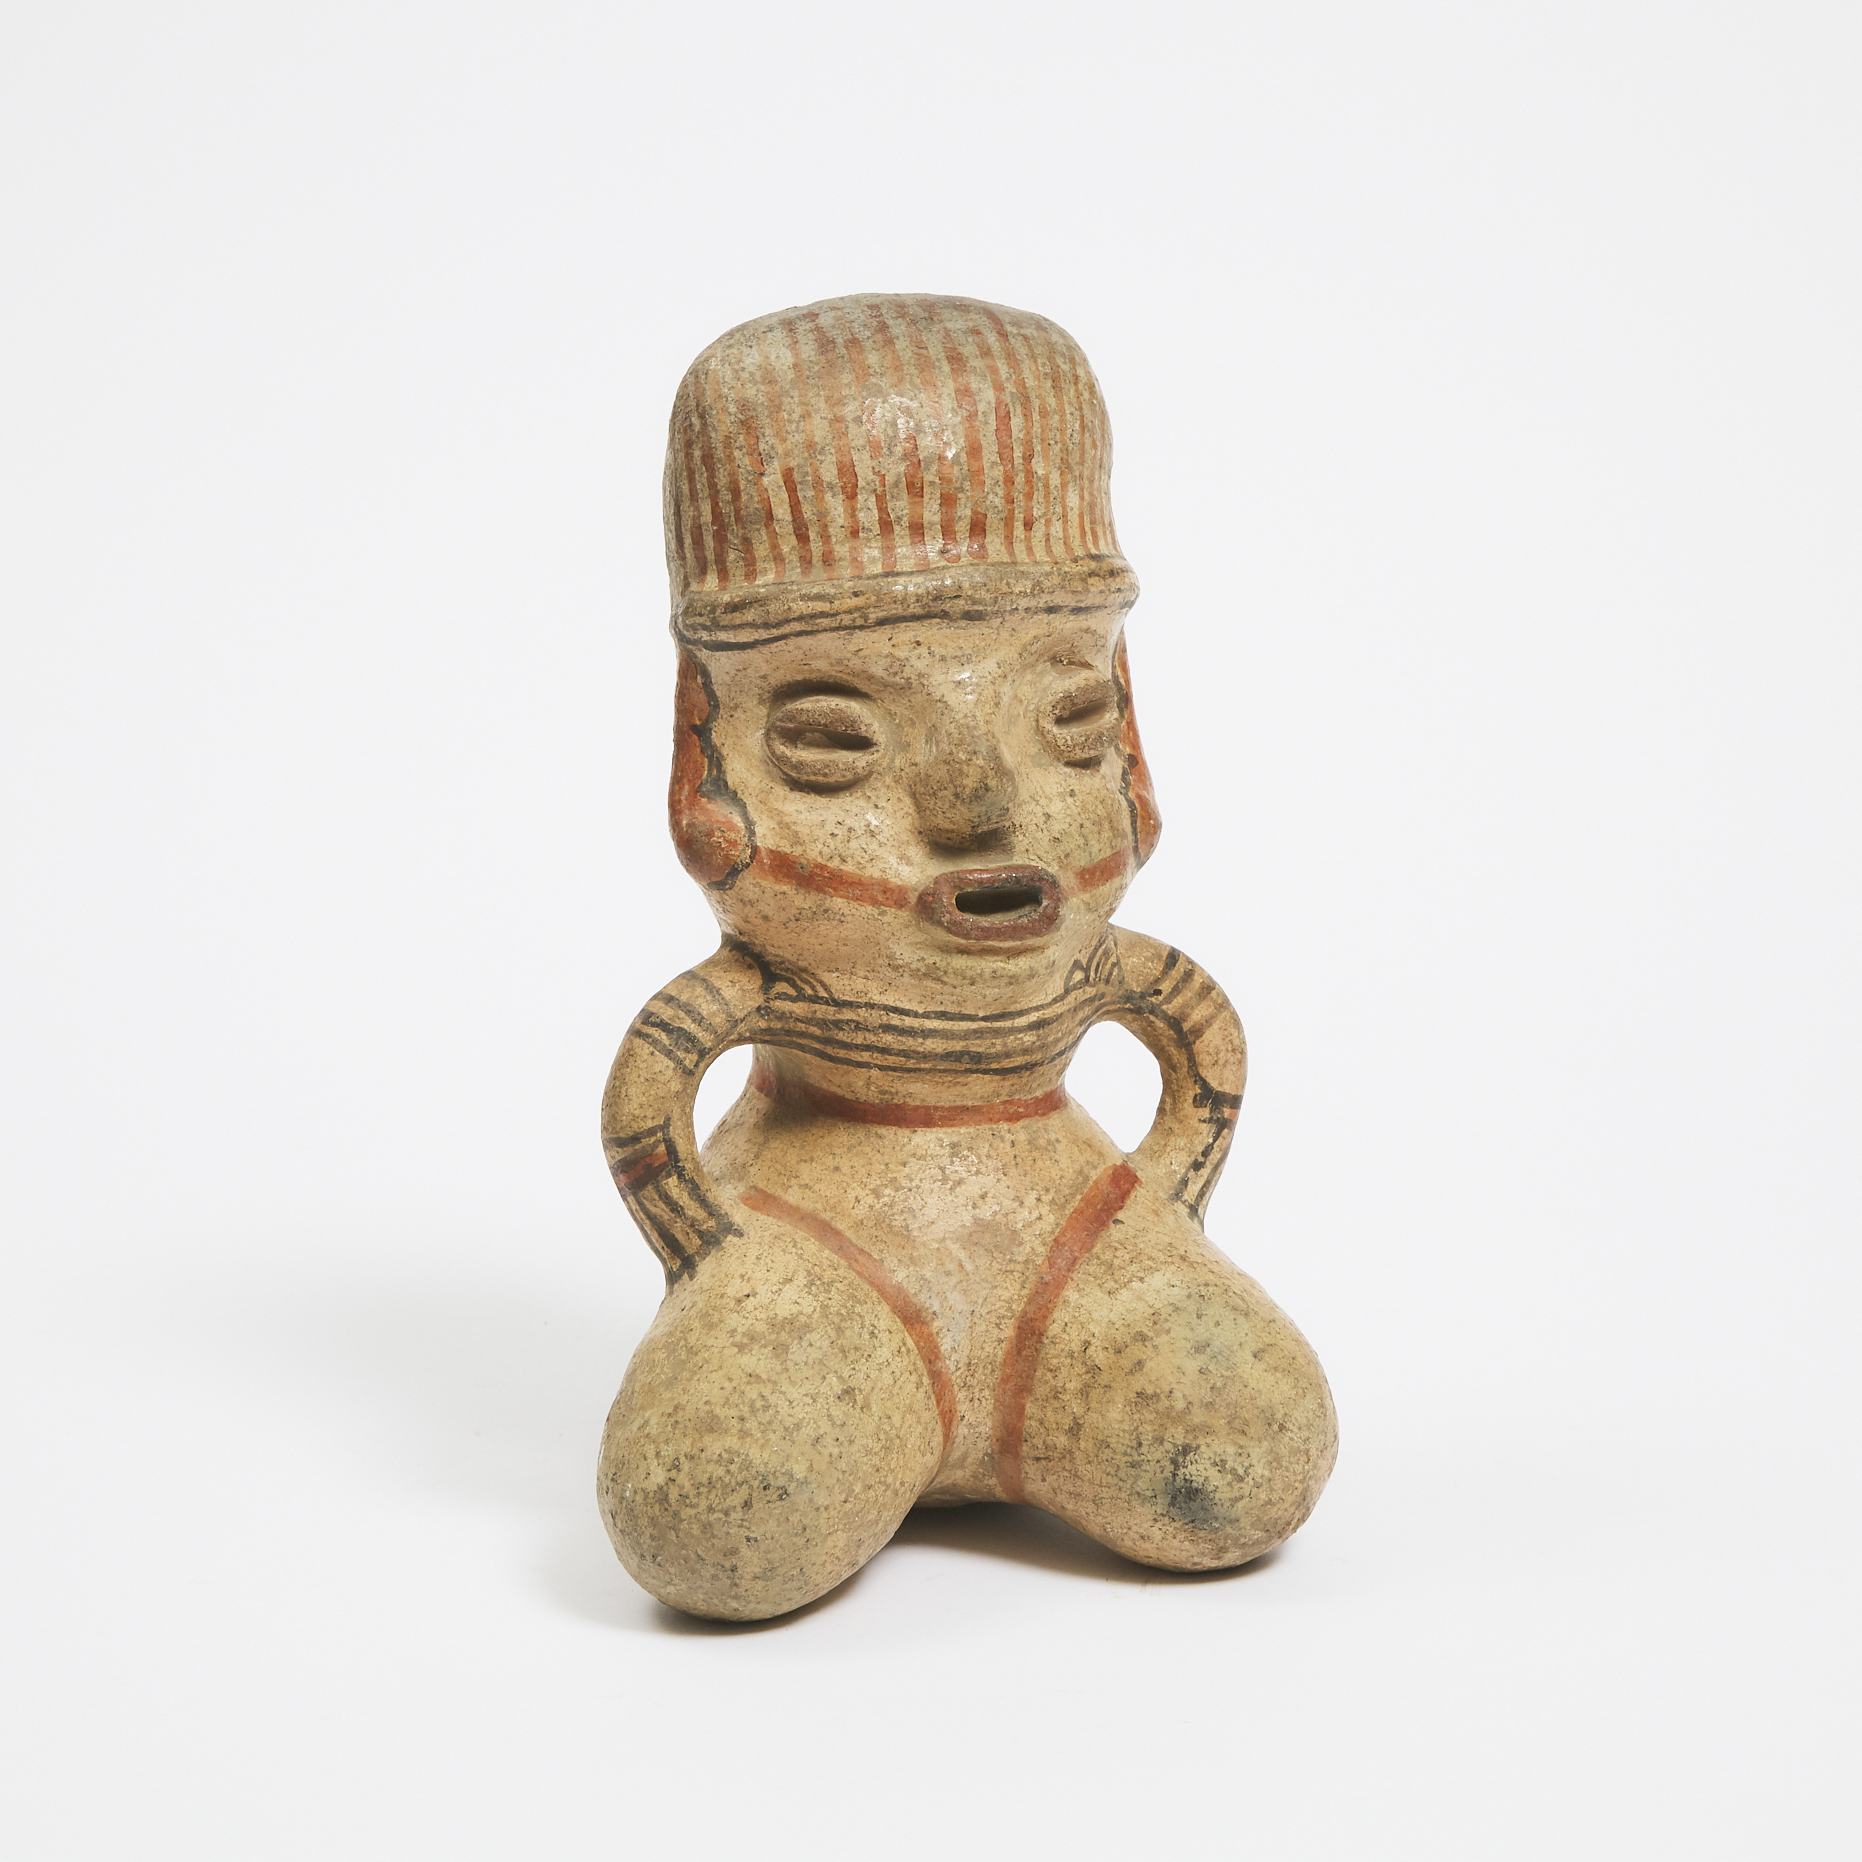 Pre-Columbian Polychrome Painted Pottery Kneeling Figure, possibly Nicoya, Costa Rica, 800-1200 AD